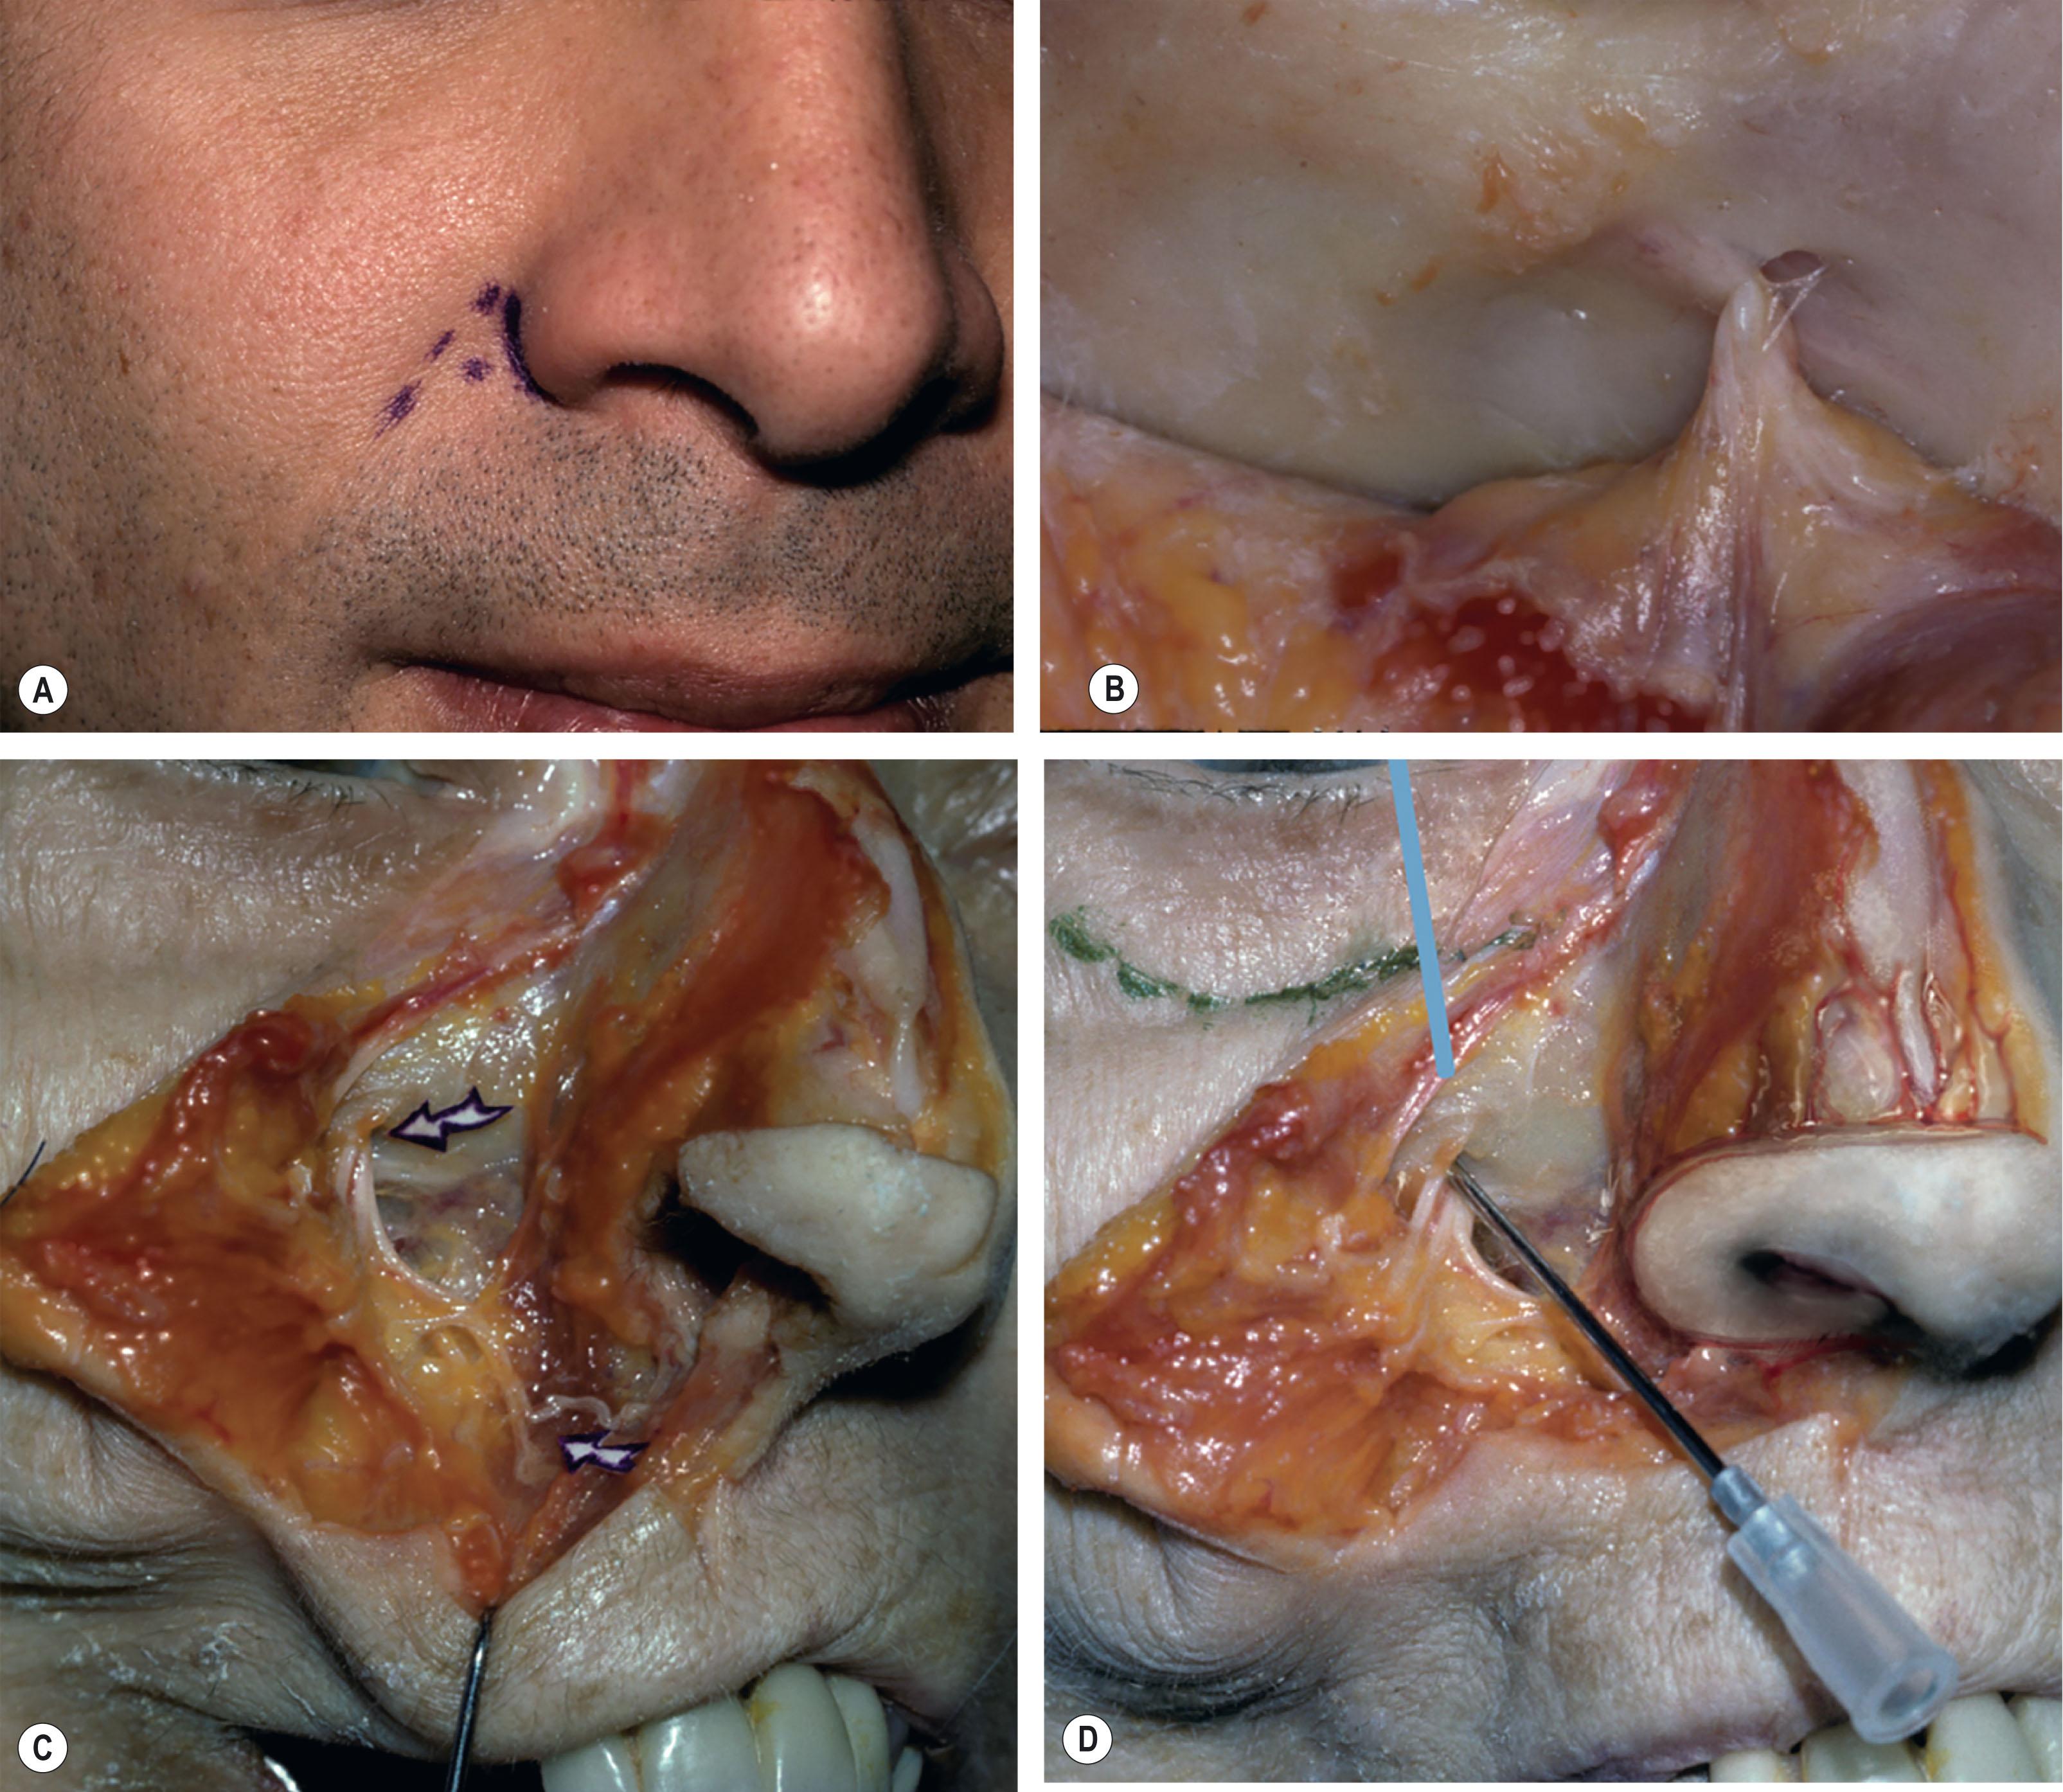 Figure 5.2, The infraorbital nerve block and optimal access. (A) The entry point of the isthmus to best enter the skin. (B) The general direction of the foramen, which has a caudal/medial trajectory from deep to superficial. (C) Infraorbital nerve, which lies in a line drawn down directly below the medial limbus. (D) Needle entering at the isthmus and in close proximity to the foramen.